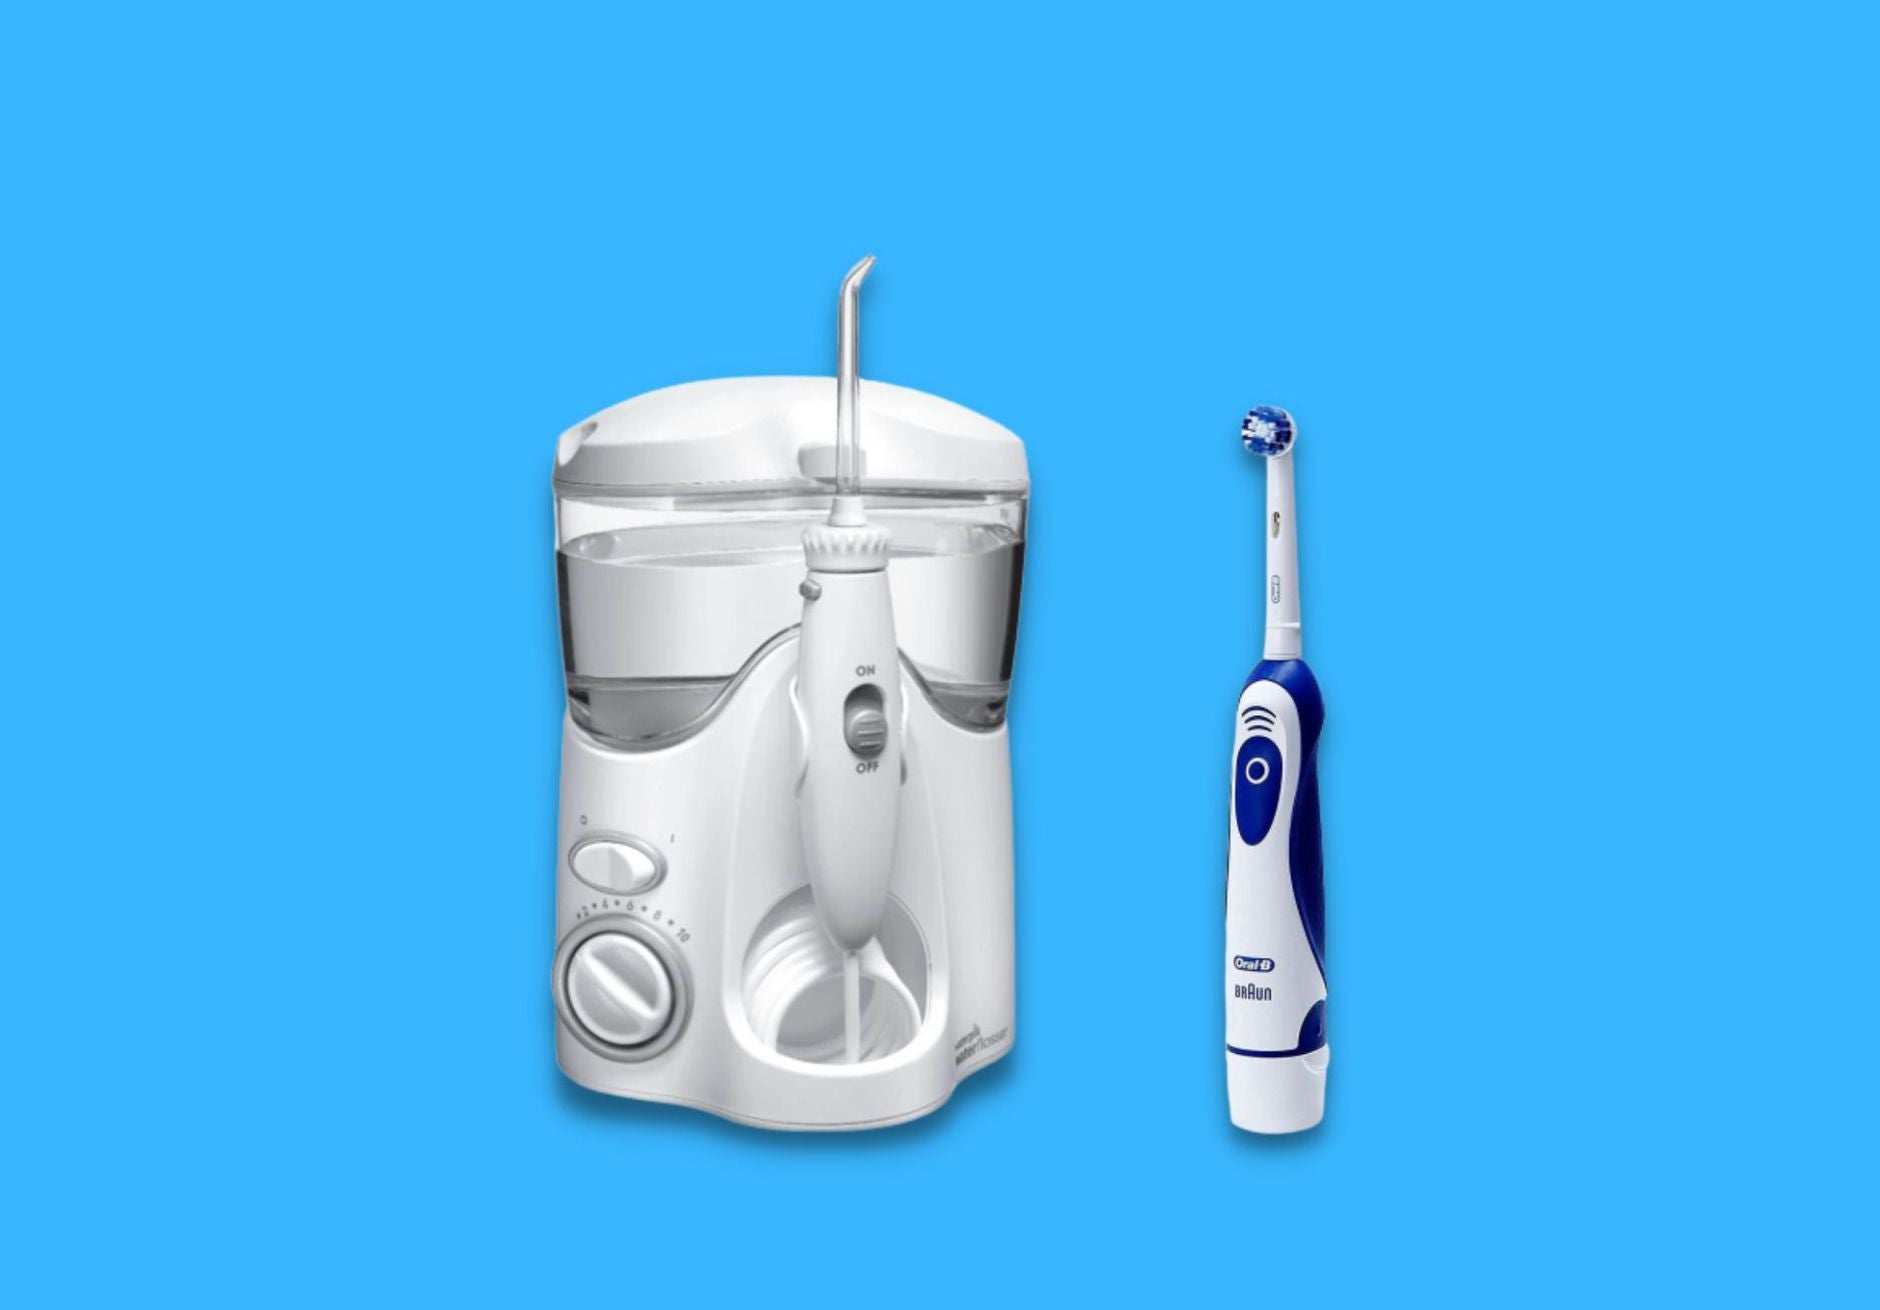 Water Flosser vs. Electric Toothbrush | How Does Each Improve Your Oral Health?